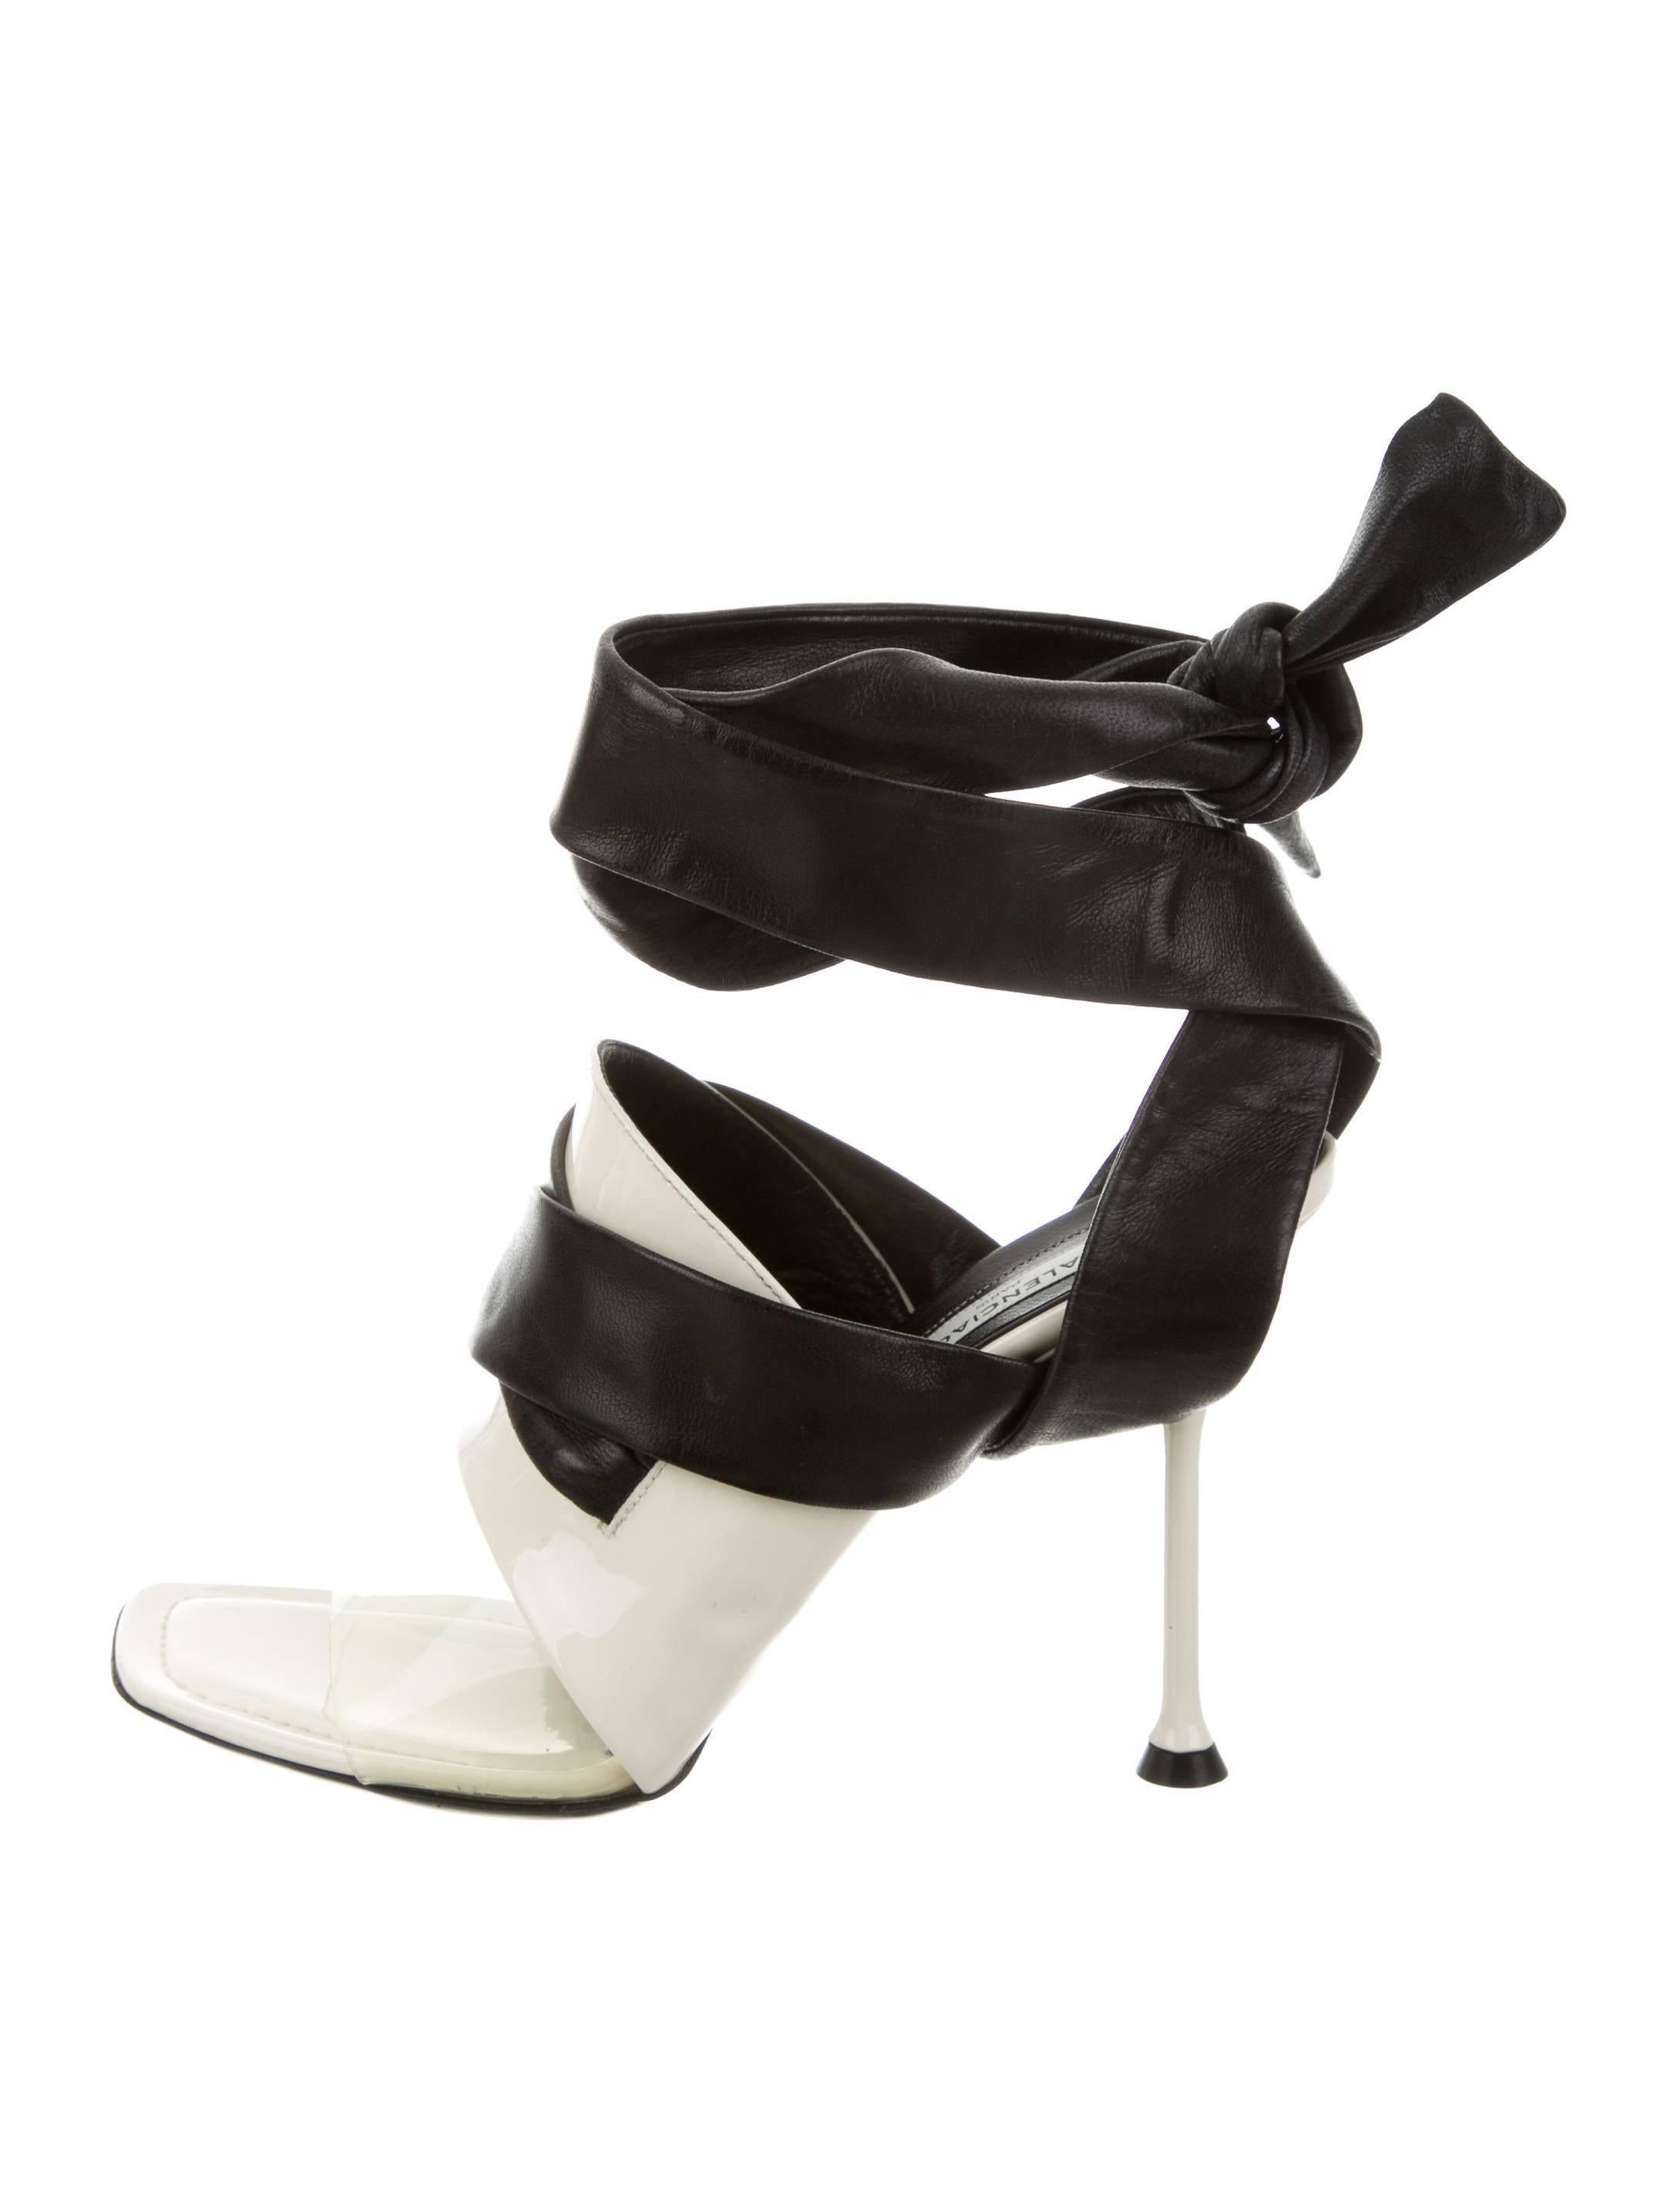 CURATOR'S NOTES

Balenciaga NEW & SOLD OUT Cut Out Heels in Box  

Size 37.5
Patent leather
PVC
Wrap around closure
Made in Italy
Heel height 4"
Includes original Balenciaga box